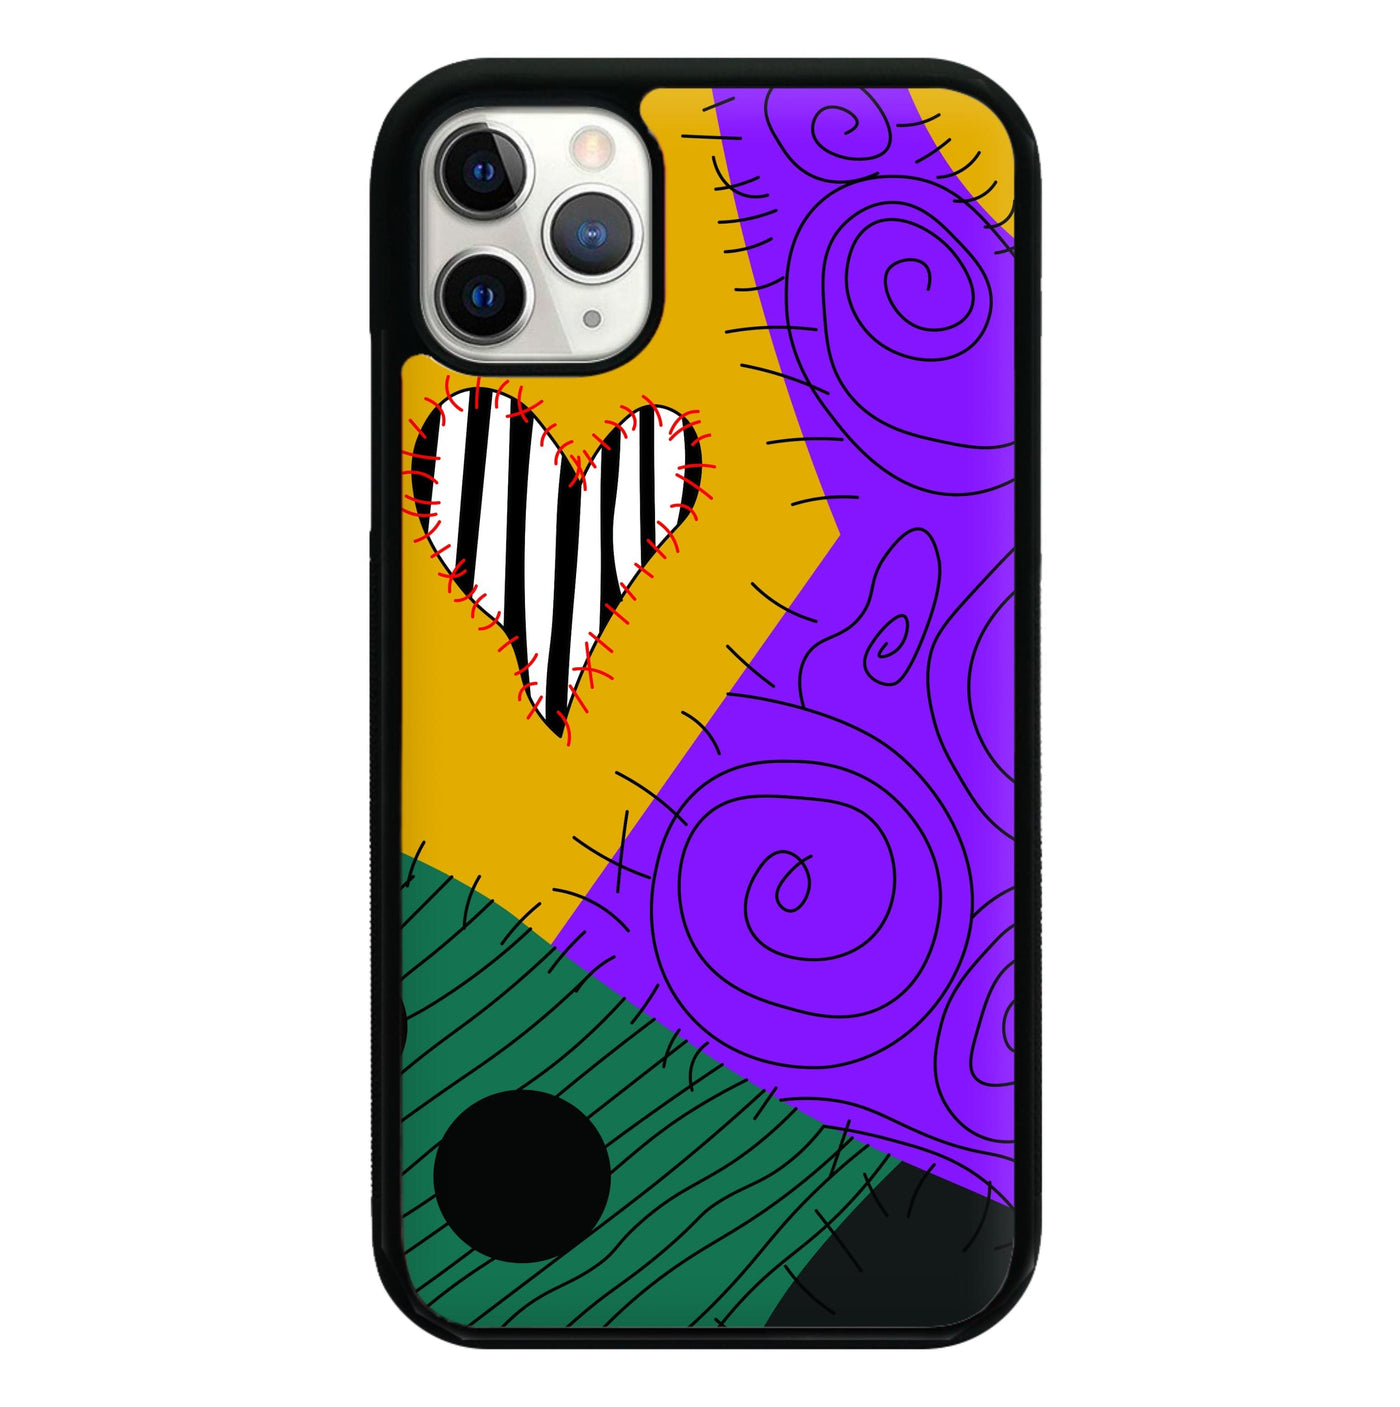 Sally's Dress - The Nightmare Before Christmas Phone Case